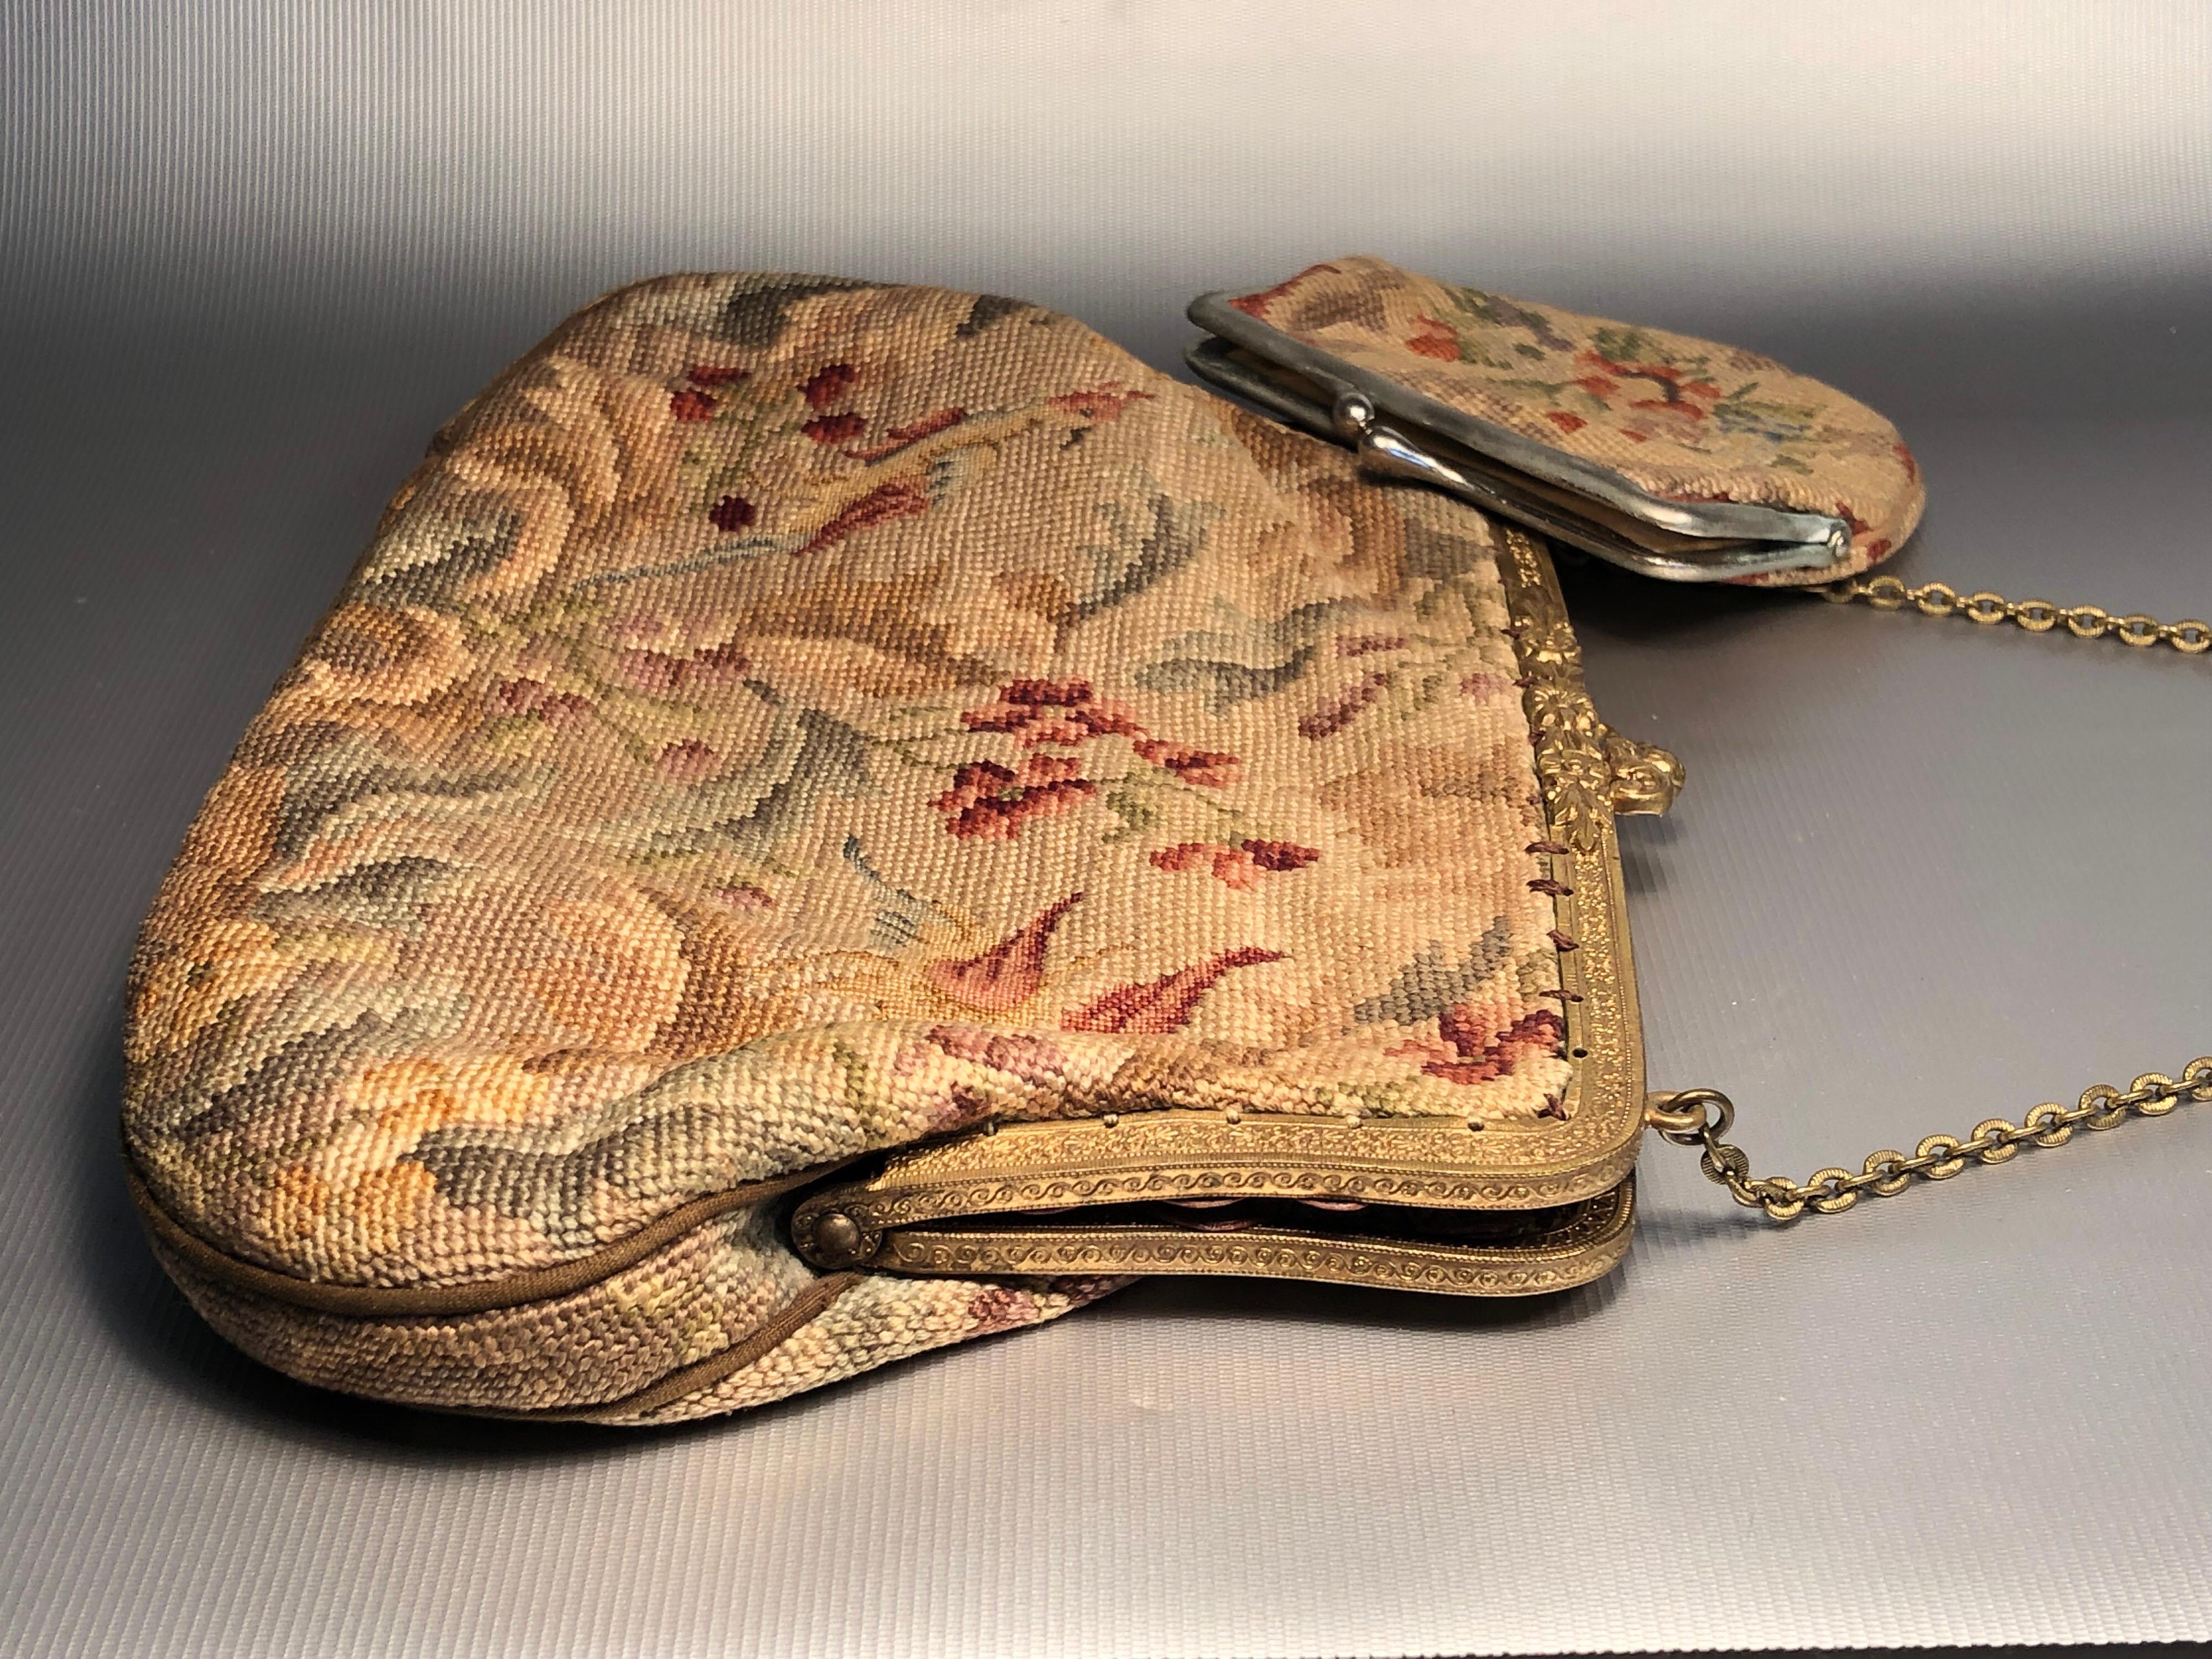 Gorgeous ladies small vintage floral handmade purse 
Complimentary shipping worldwide.